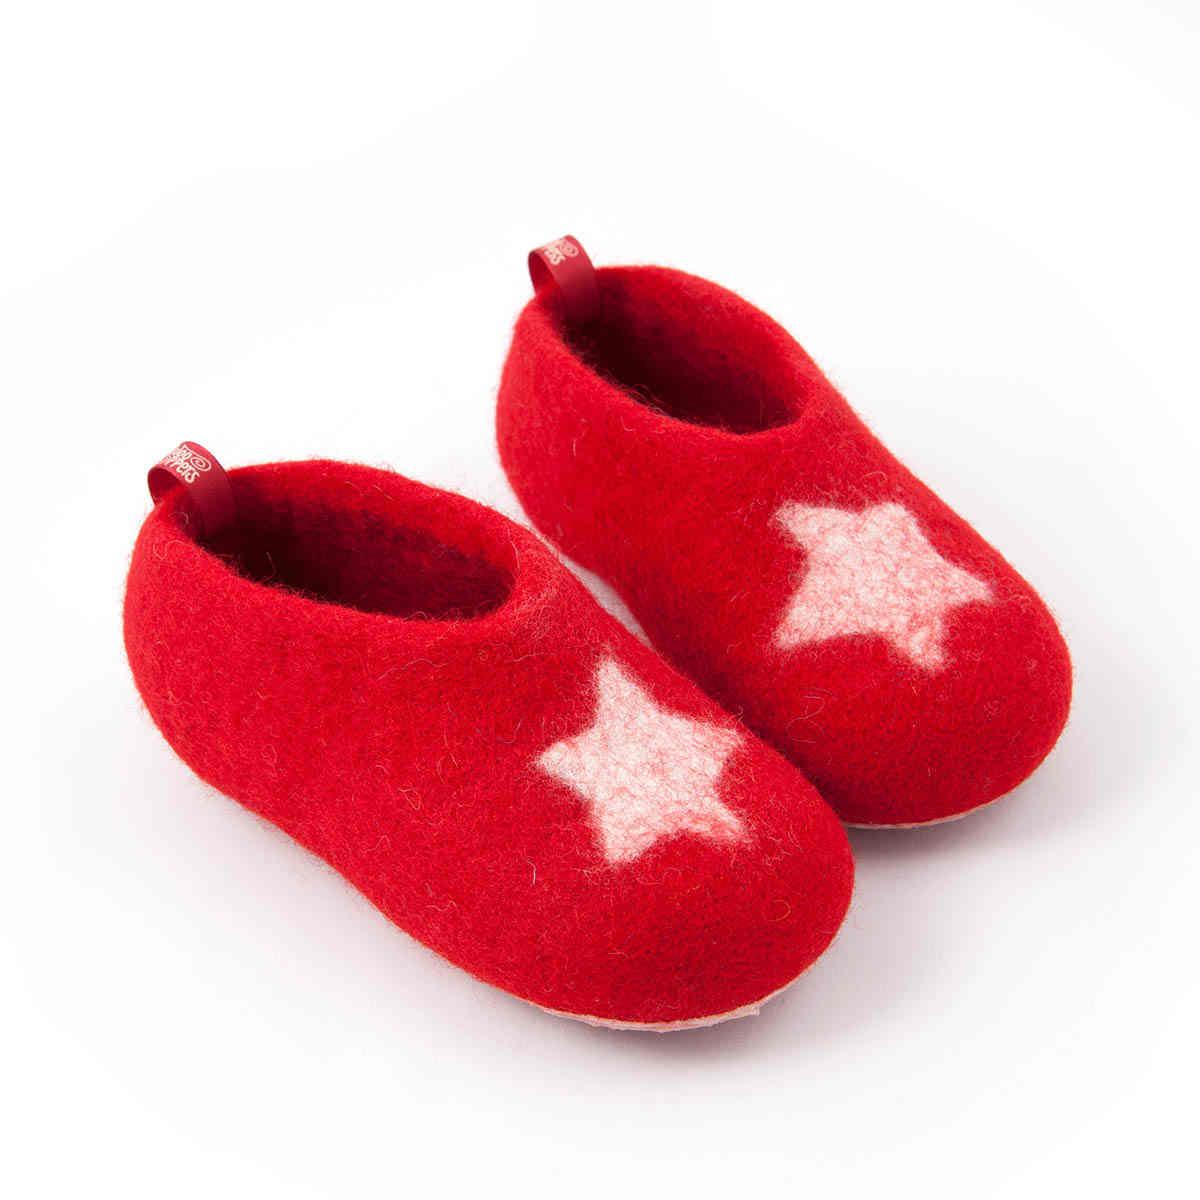 childrens red slippers